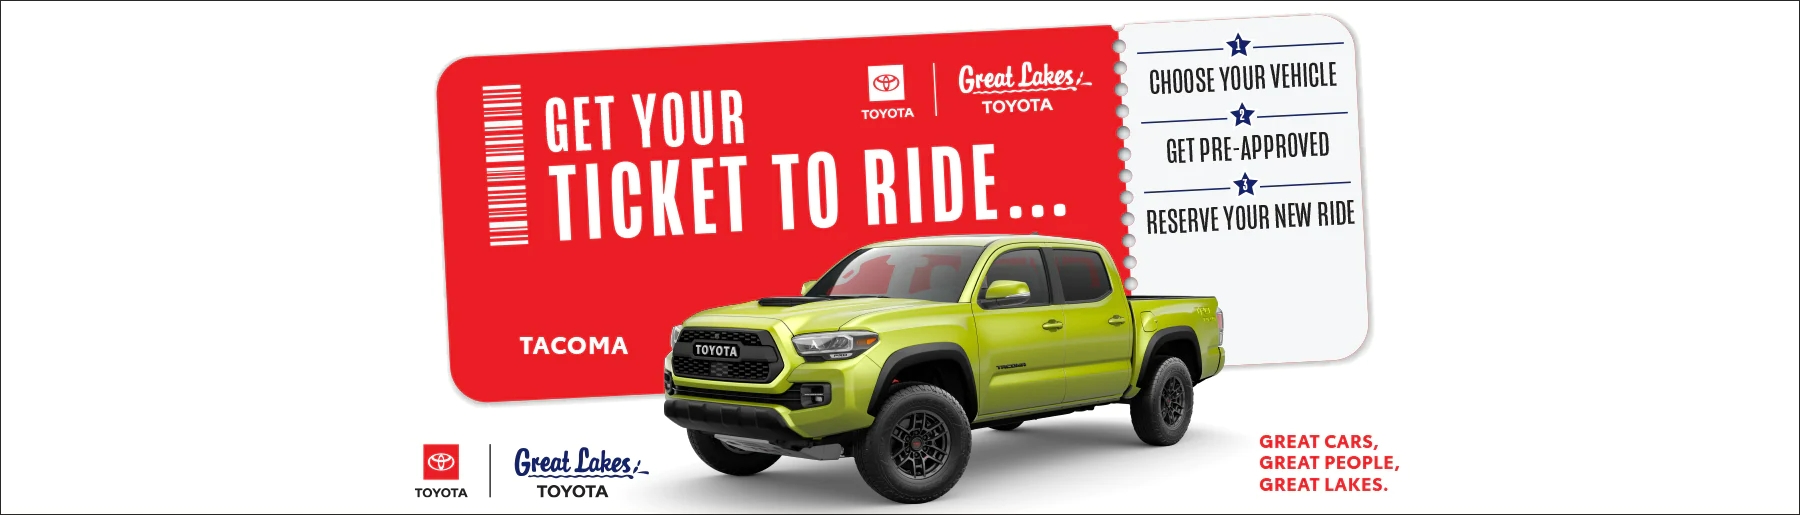 Great Lakes Toyota Findlay OH